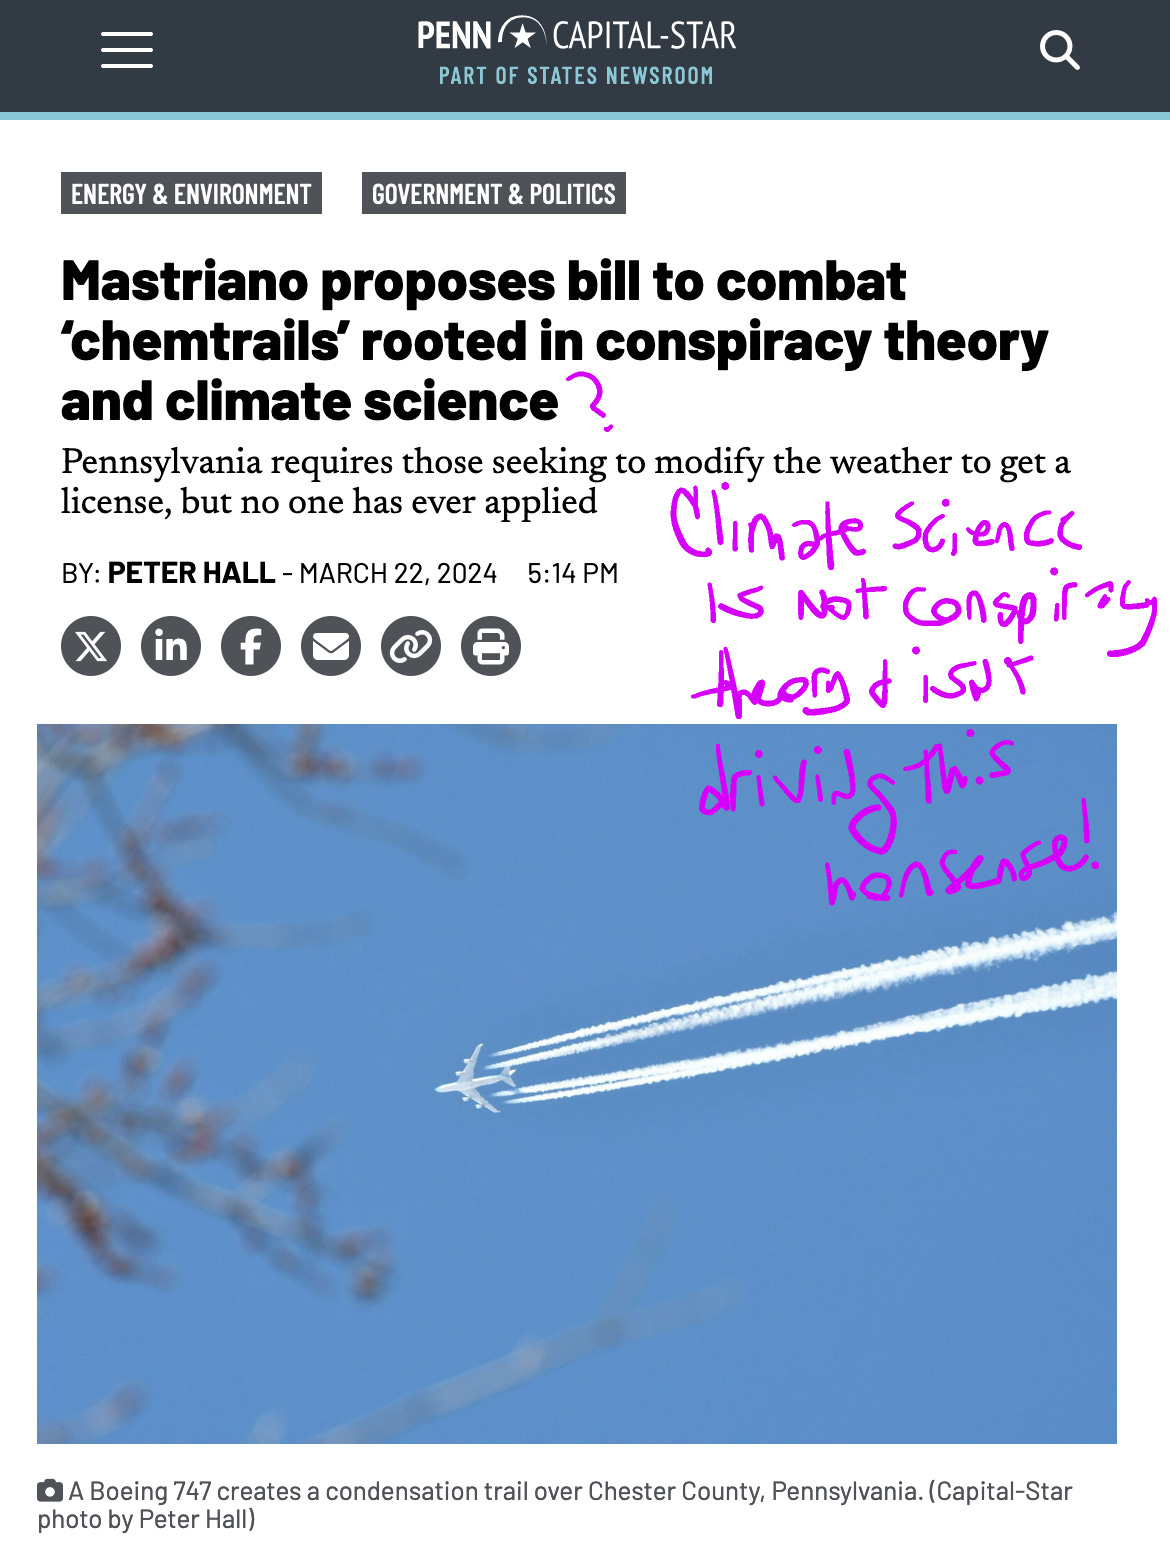 Pennsylvania Capital-Star - Headline: Mastriano proposes bill to combat ‘chemtrails’ rooted in conspiracy theory and climate science BY: PETER HALL - MARCH 22, 2024 5:14 PM Screenshot of article includes a question mark written in purple marker next to the words climate science, and in the margin in marker is written Climate science is not conspiracy theory & isn't driving this nonsense. 